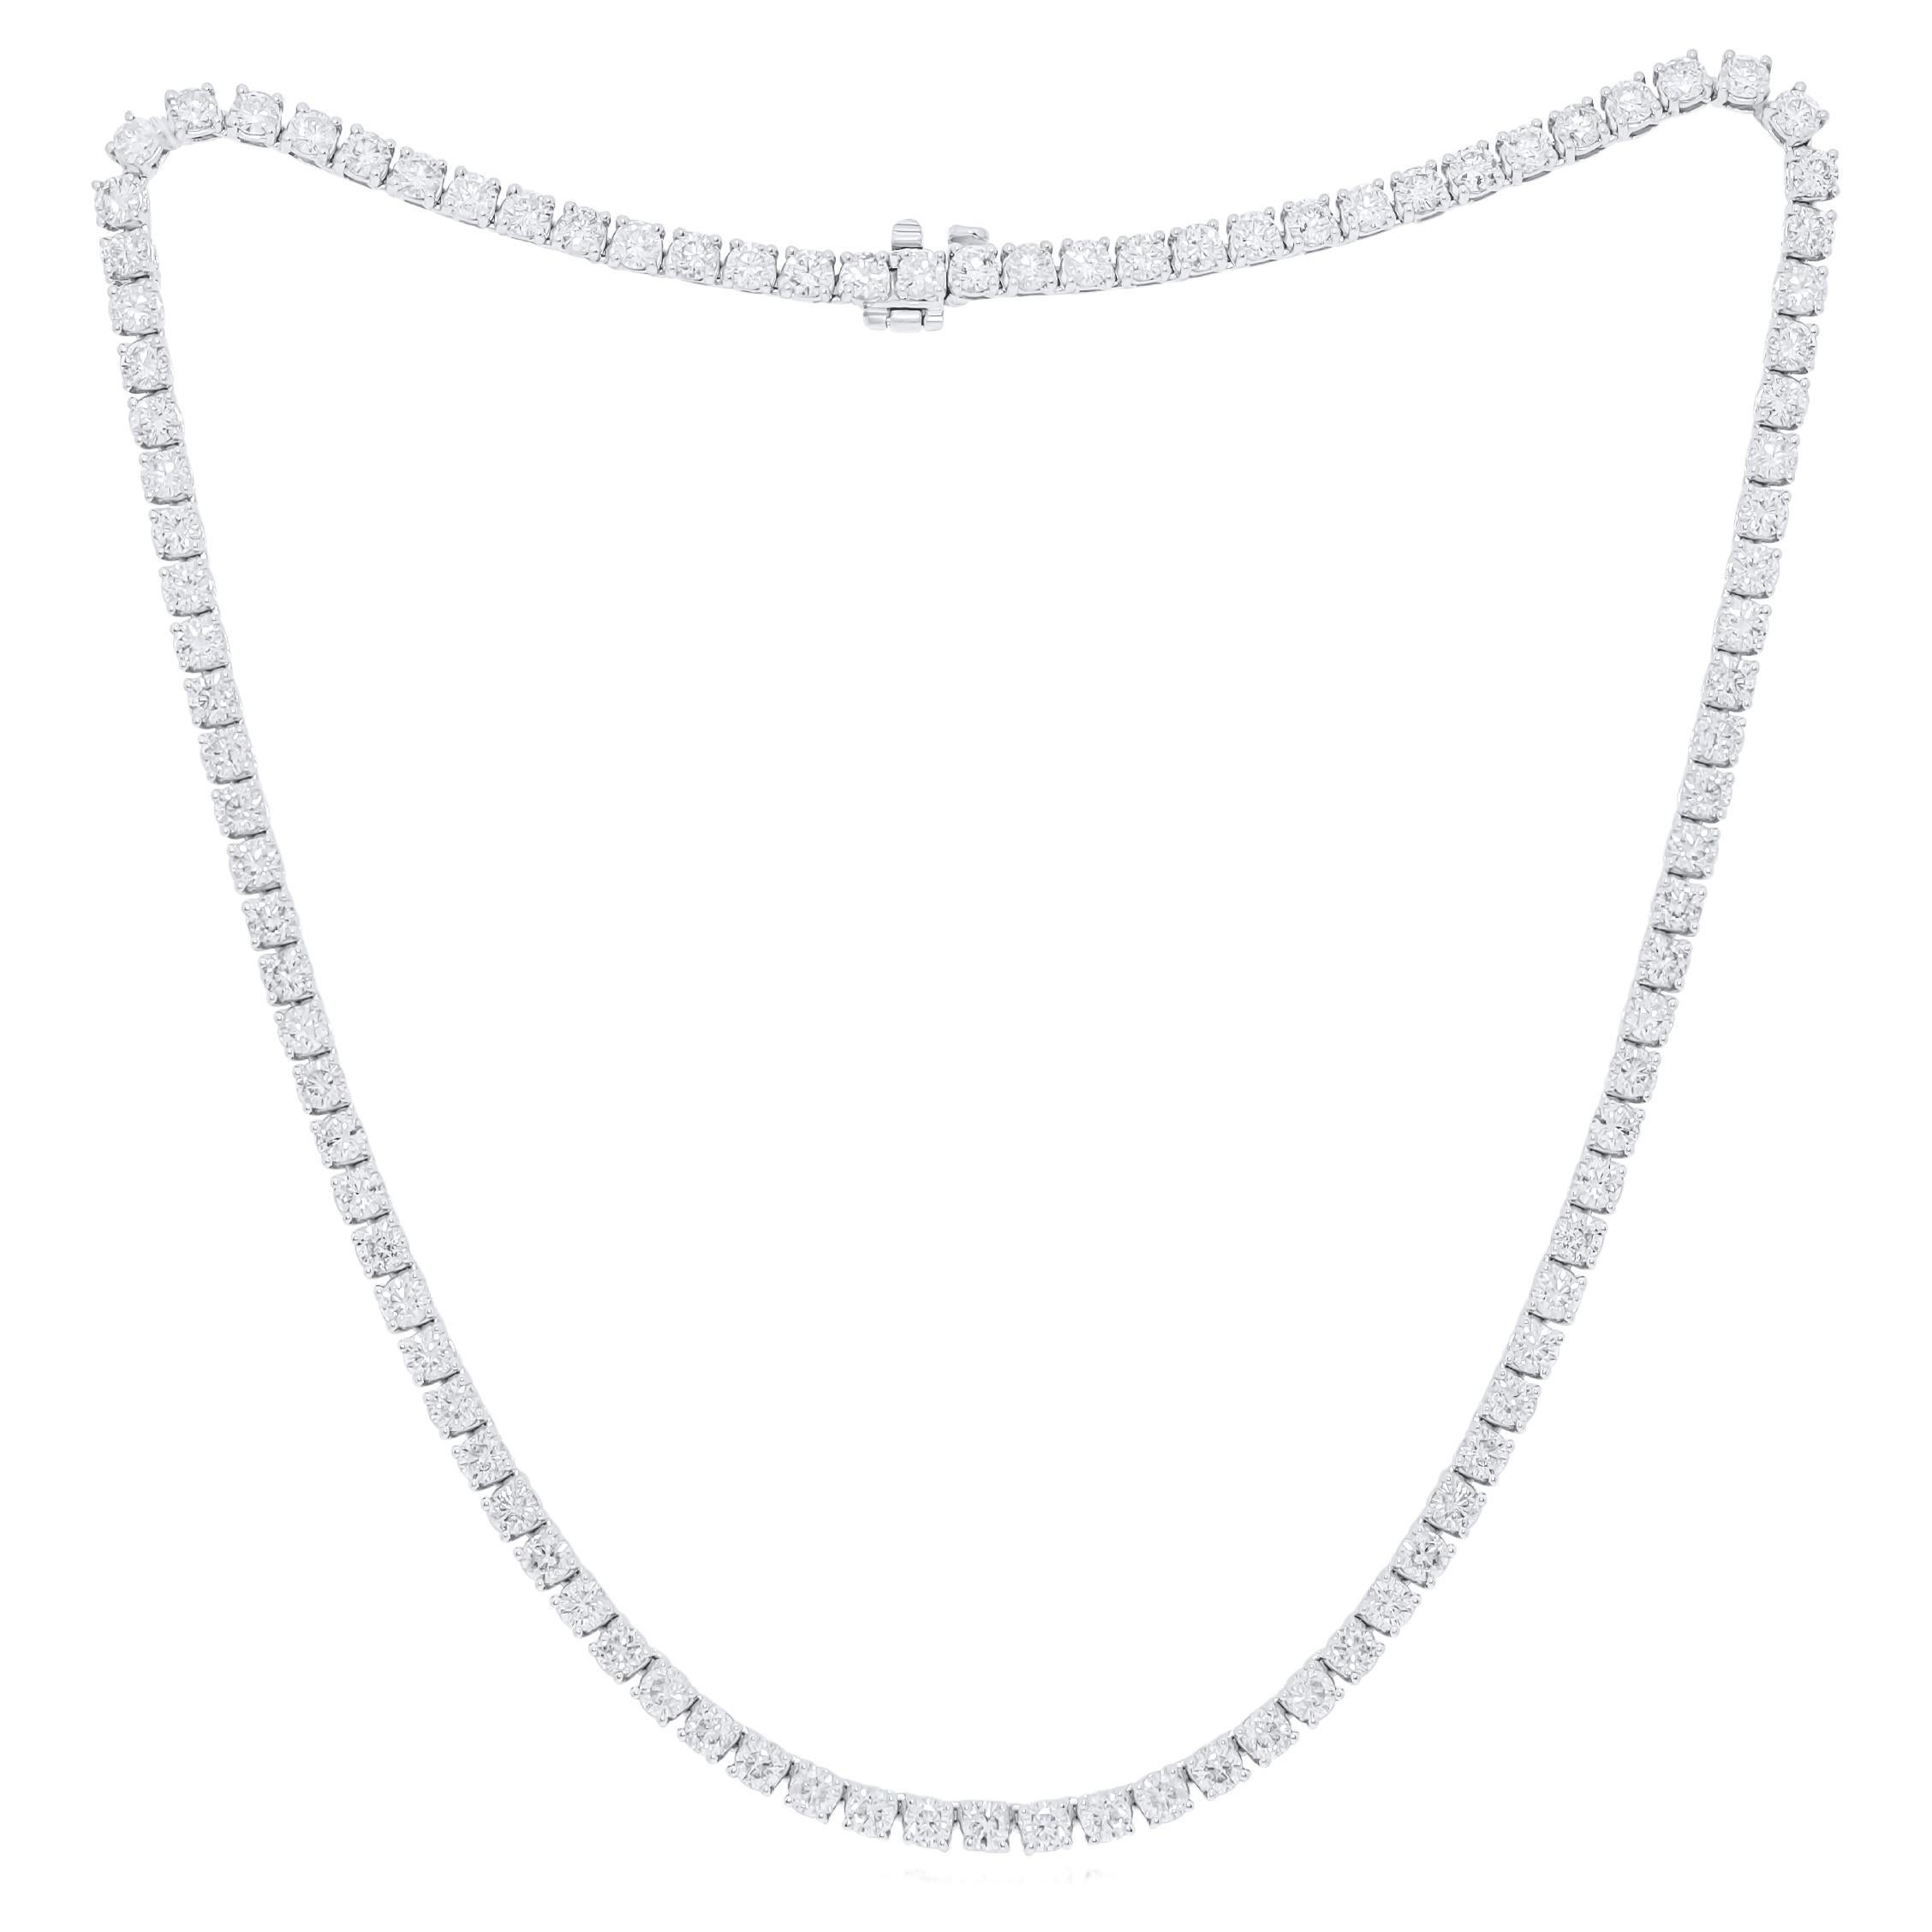 Diana M. Custom 25.40 cts Round 4 Prong Diamond Tennis Necklace  18k White Gold For Sale